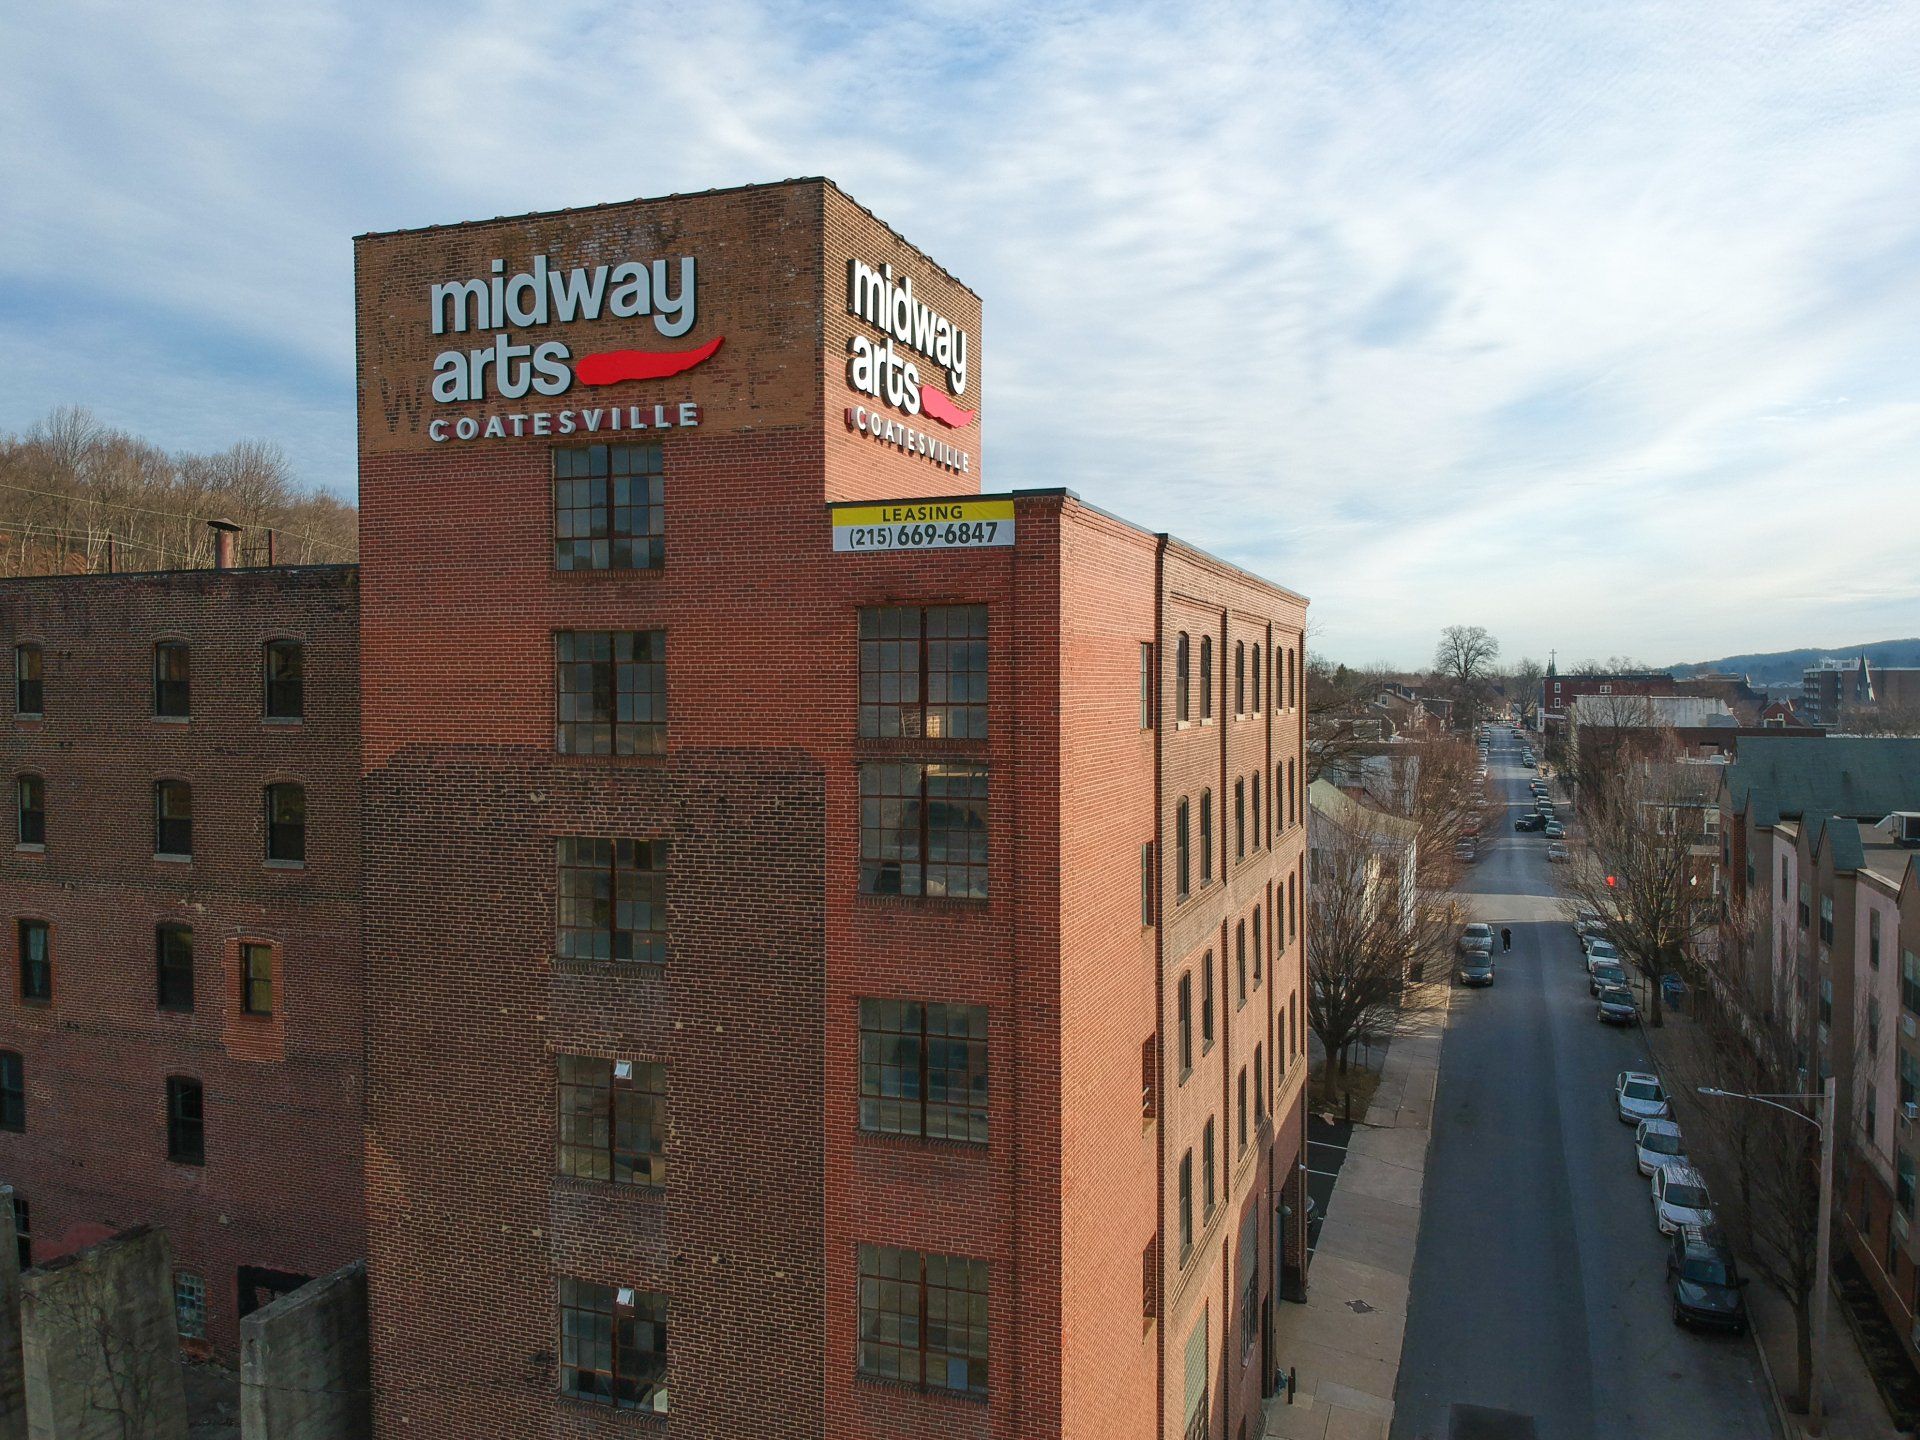 Midway Arts